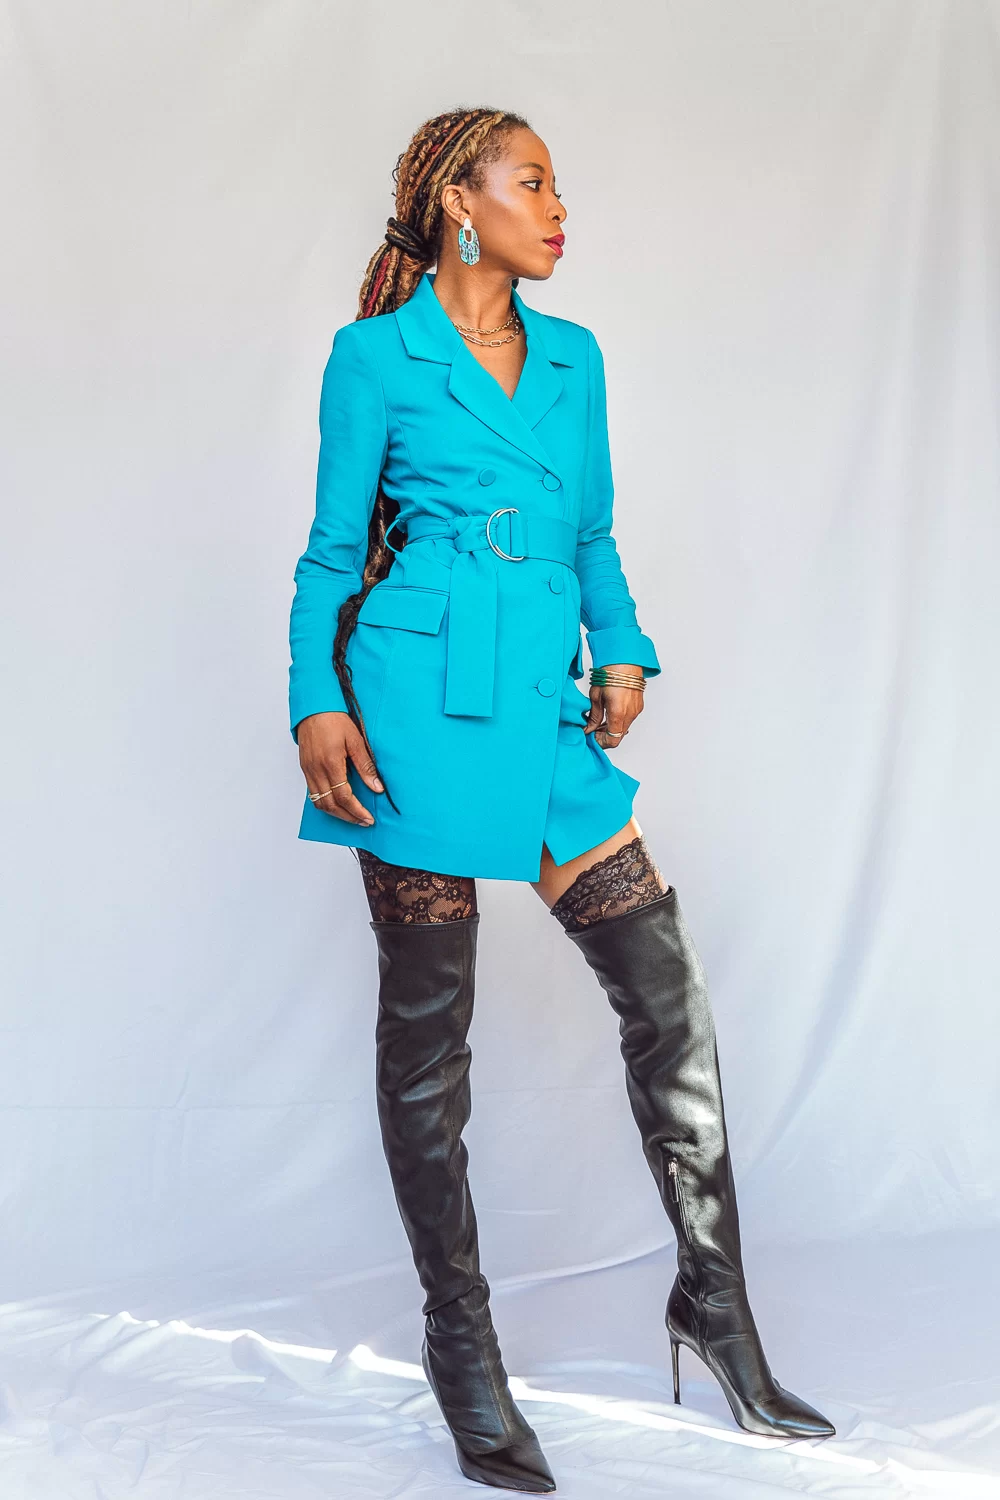 OOTD: Styling Blazer Dress With Thigh High Boots and Tights - OpalbyOpal